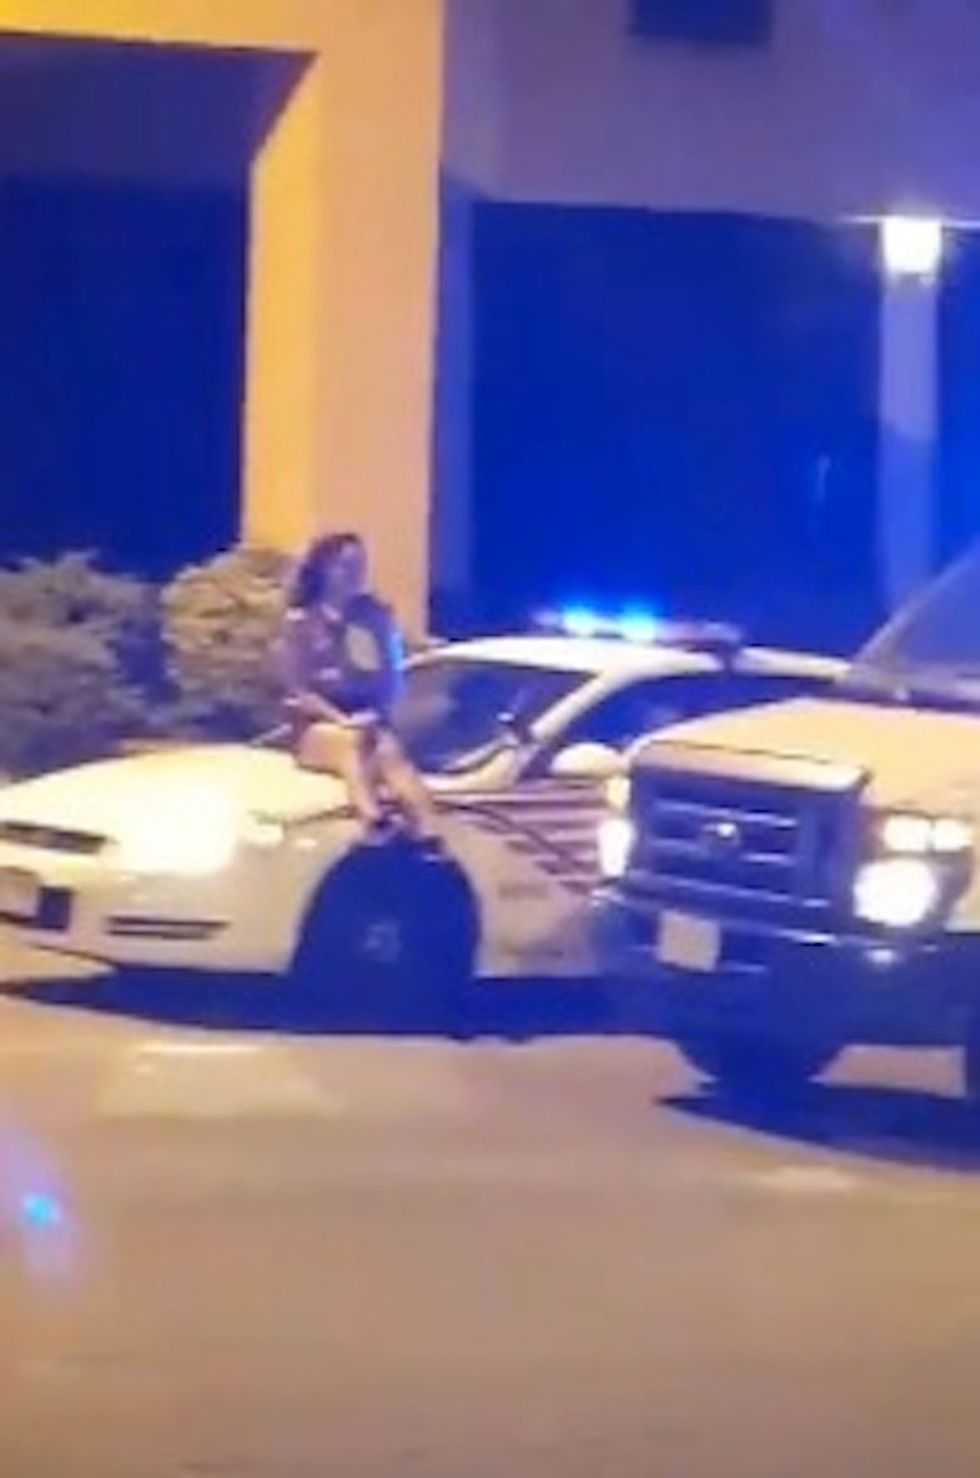 Look Closely at the Car This Woman Is Sitting on and You'll See Why Some D.C. Cops Say They're 'Embarrassed